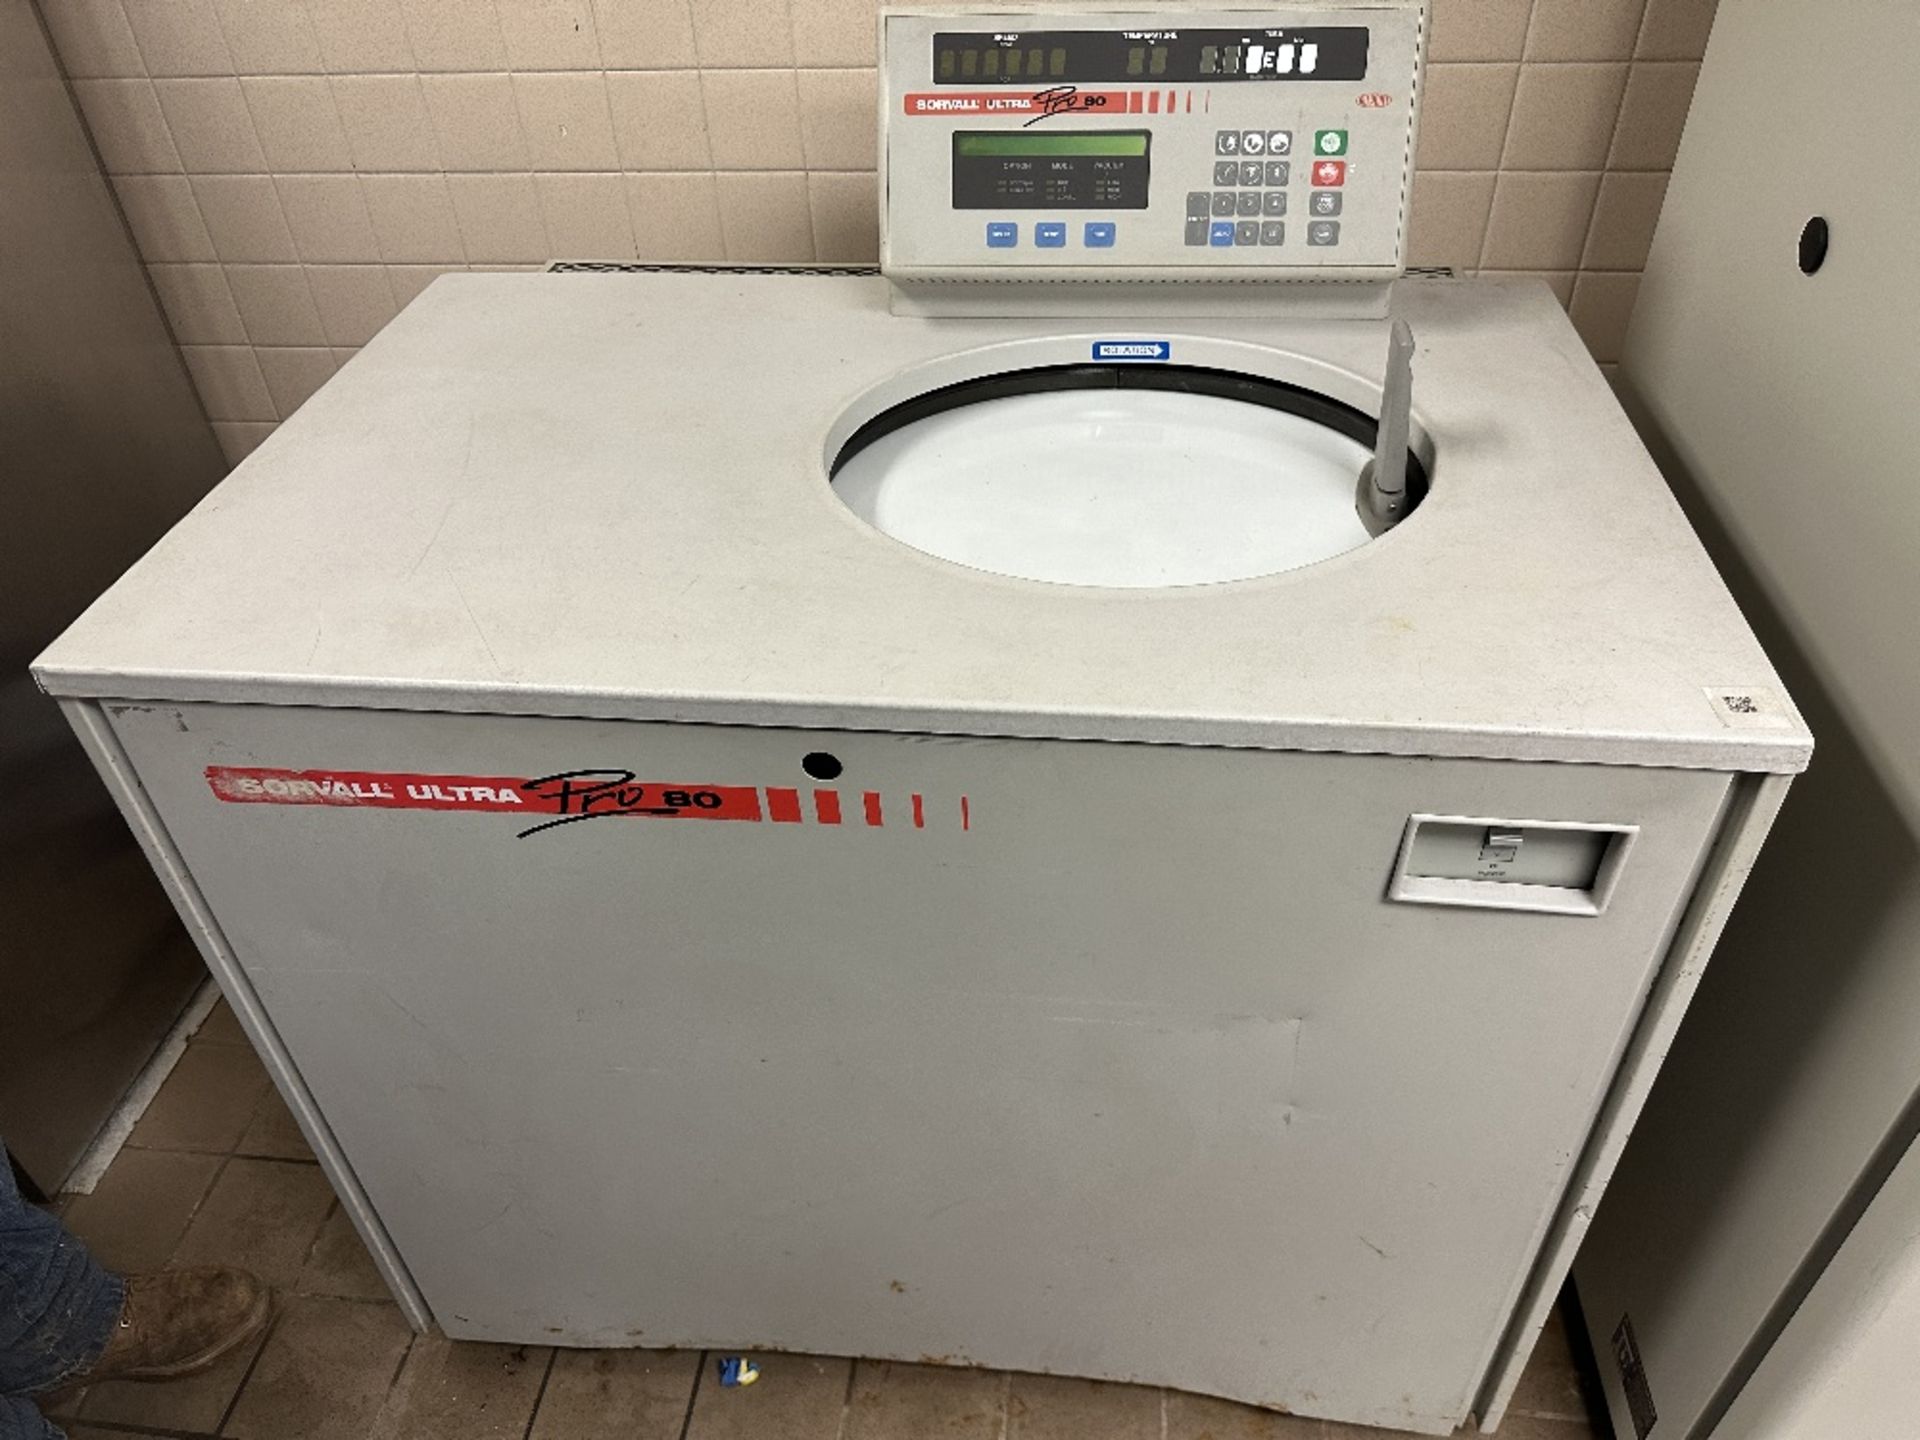 Sorvall Ultra Pro 80 Refrigerated Centrifuge (LOCATED IN MIDDLETOWN, N.Y.)-FOR PACKAGING &